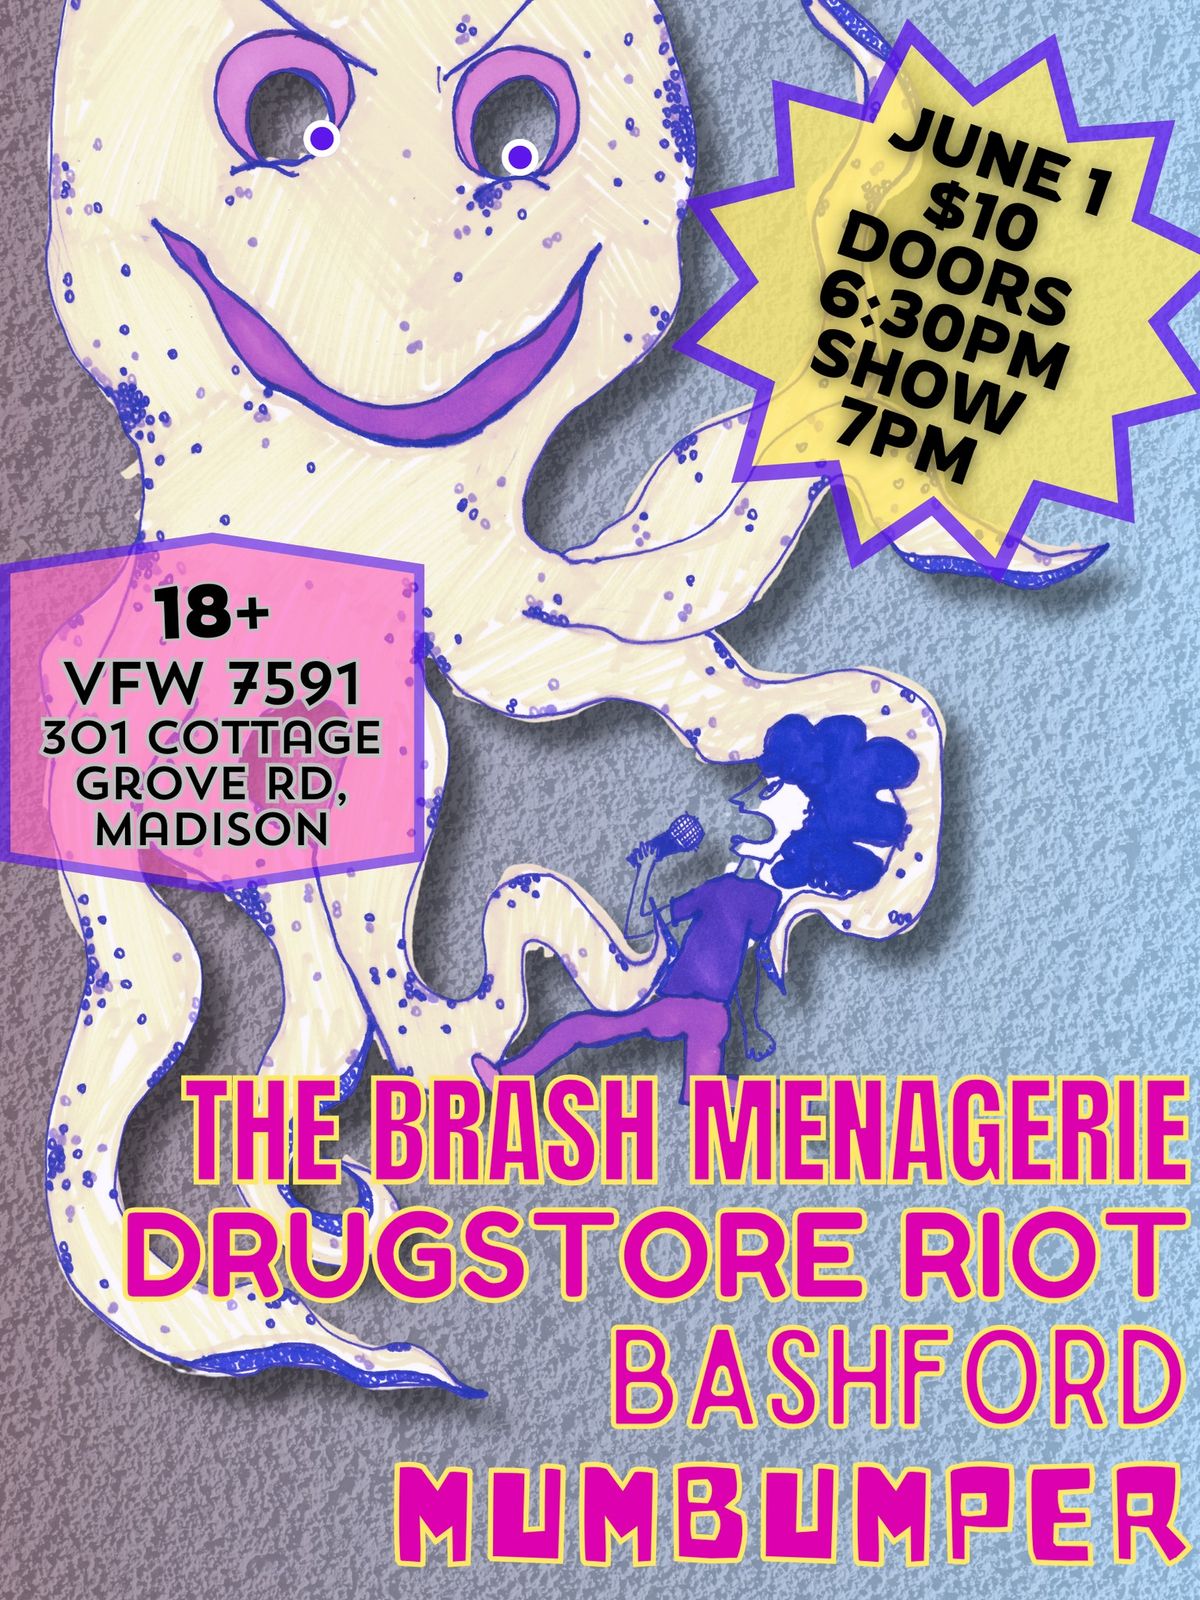 Brash Menagerie, Drugstore Riot, Ready For the Fall, Mumbumper at VFW 7591